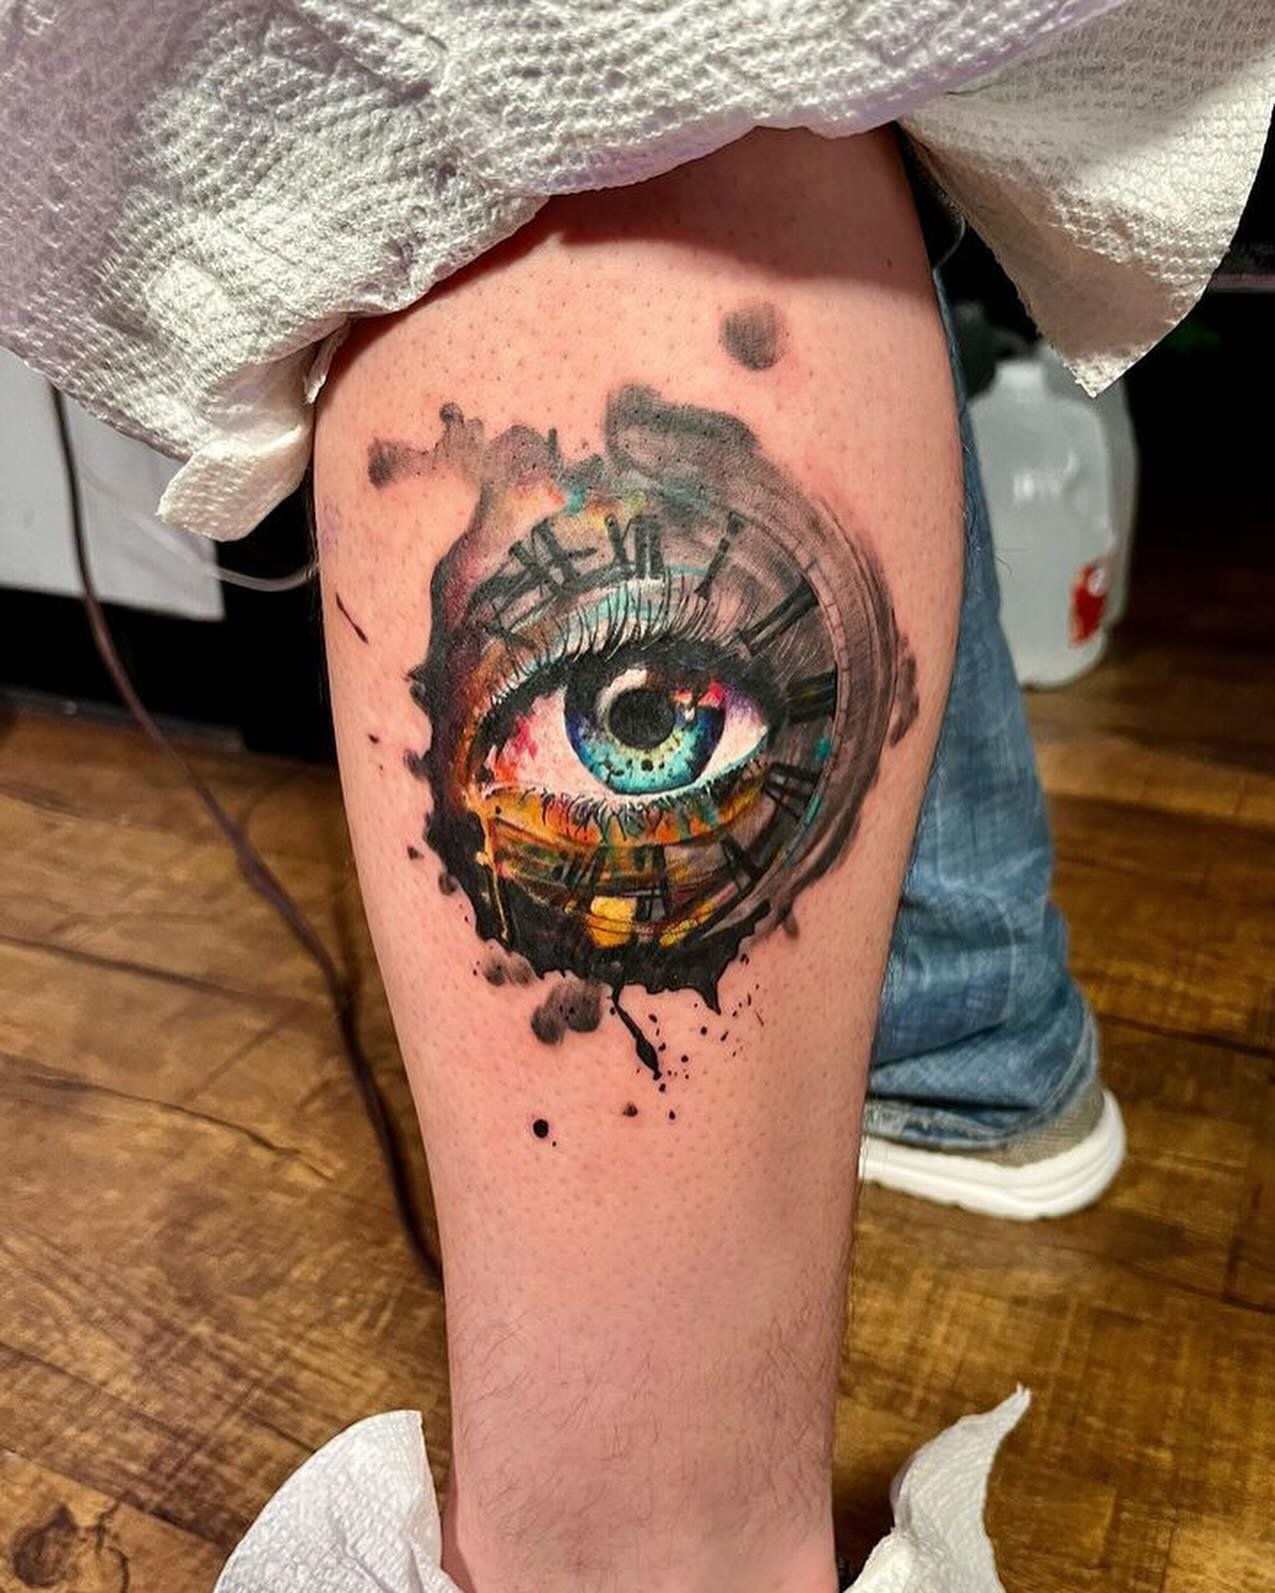 GUEST ARTIST ALERT:
We are excited to welcome @bkylemcintosh this June 18th-22nd! Check out his awesome work and snag a spot while you can&hellip; 
- inquiries for bookings can be messaged on Facebook to Beauty From Ashes Tattoo LLC w/(Joplin) in the